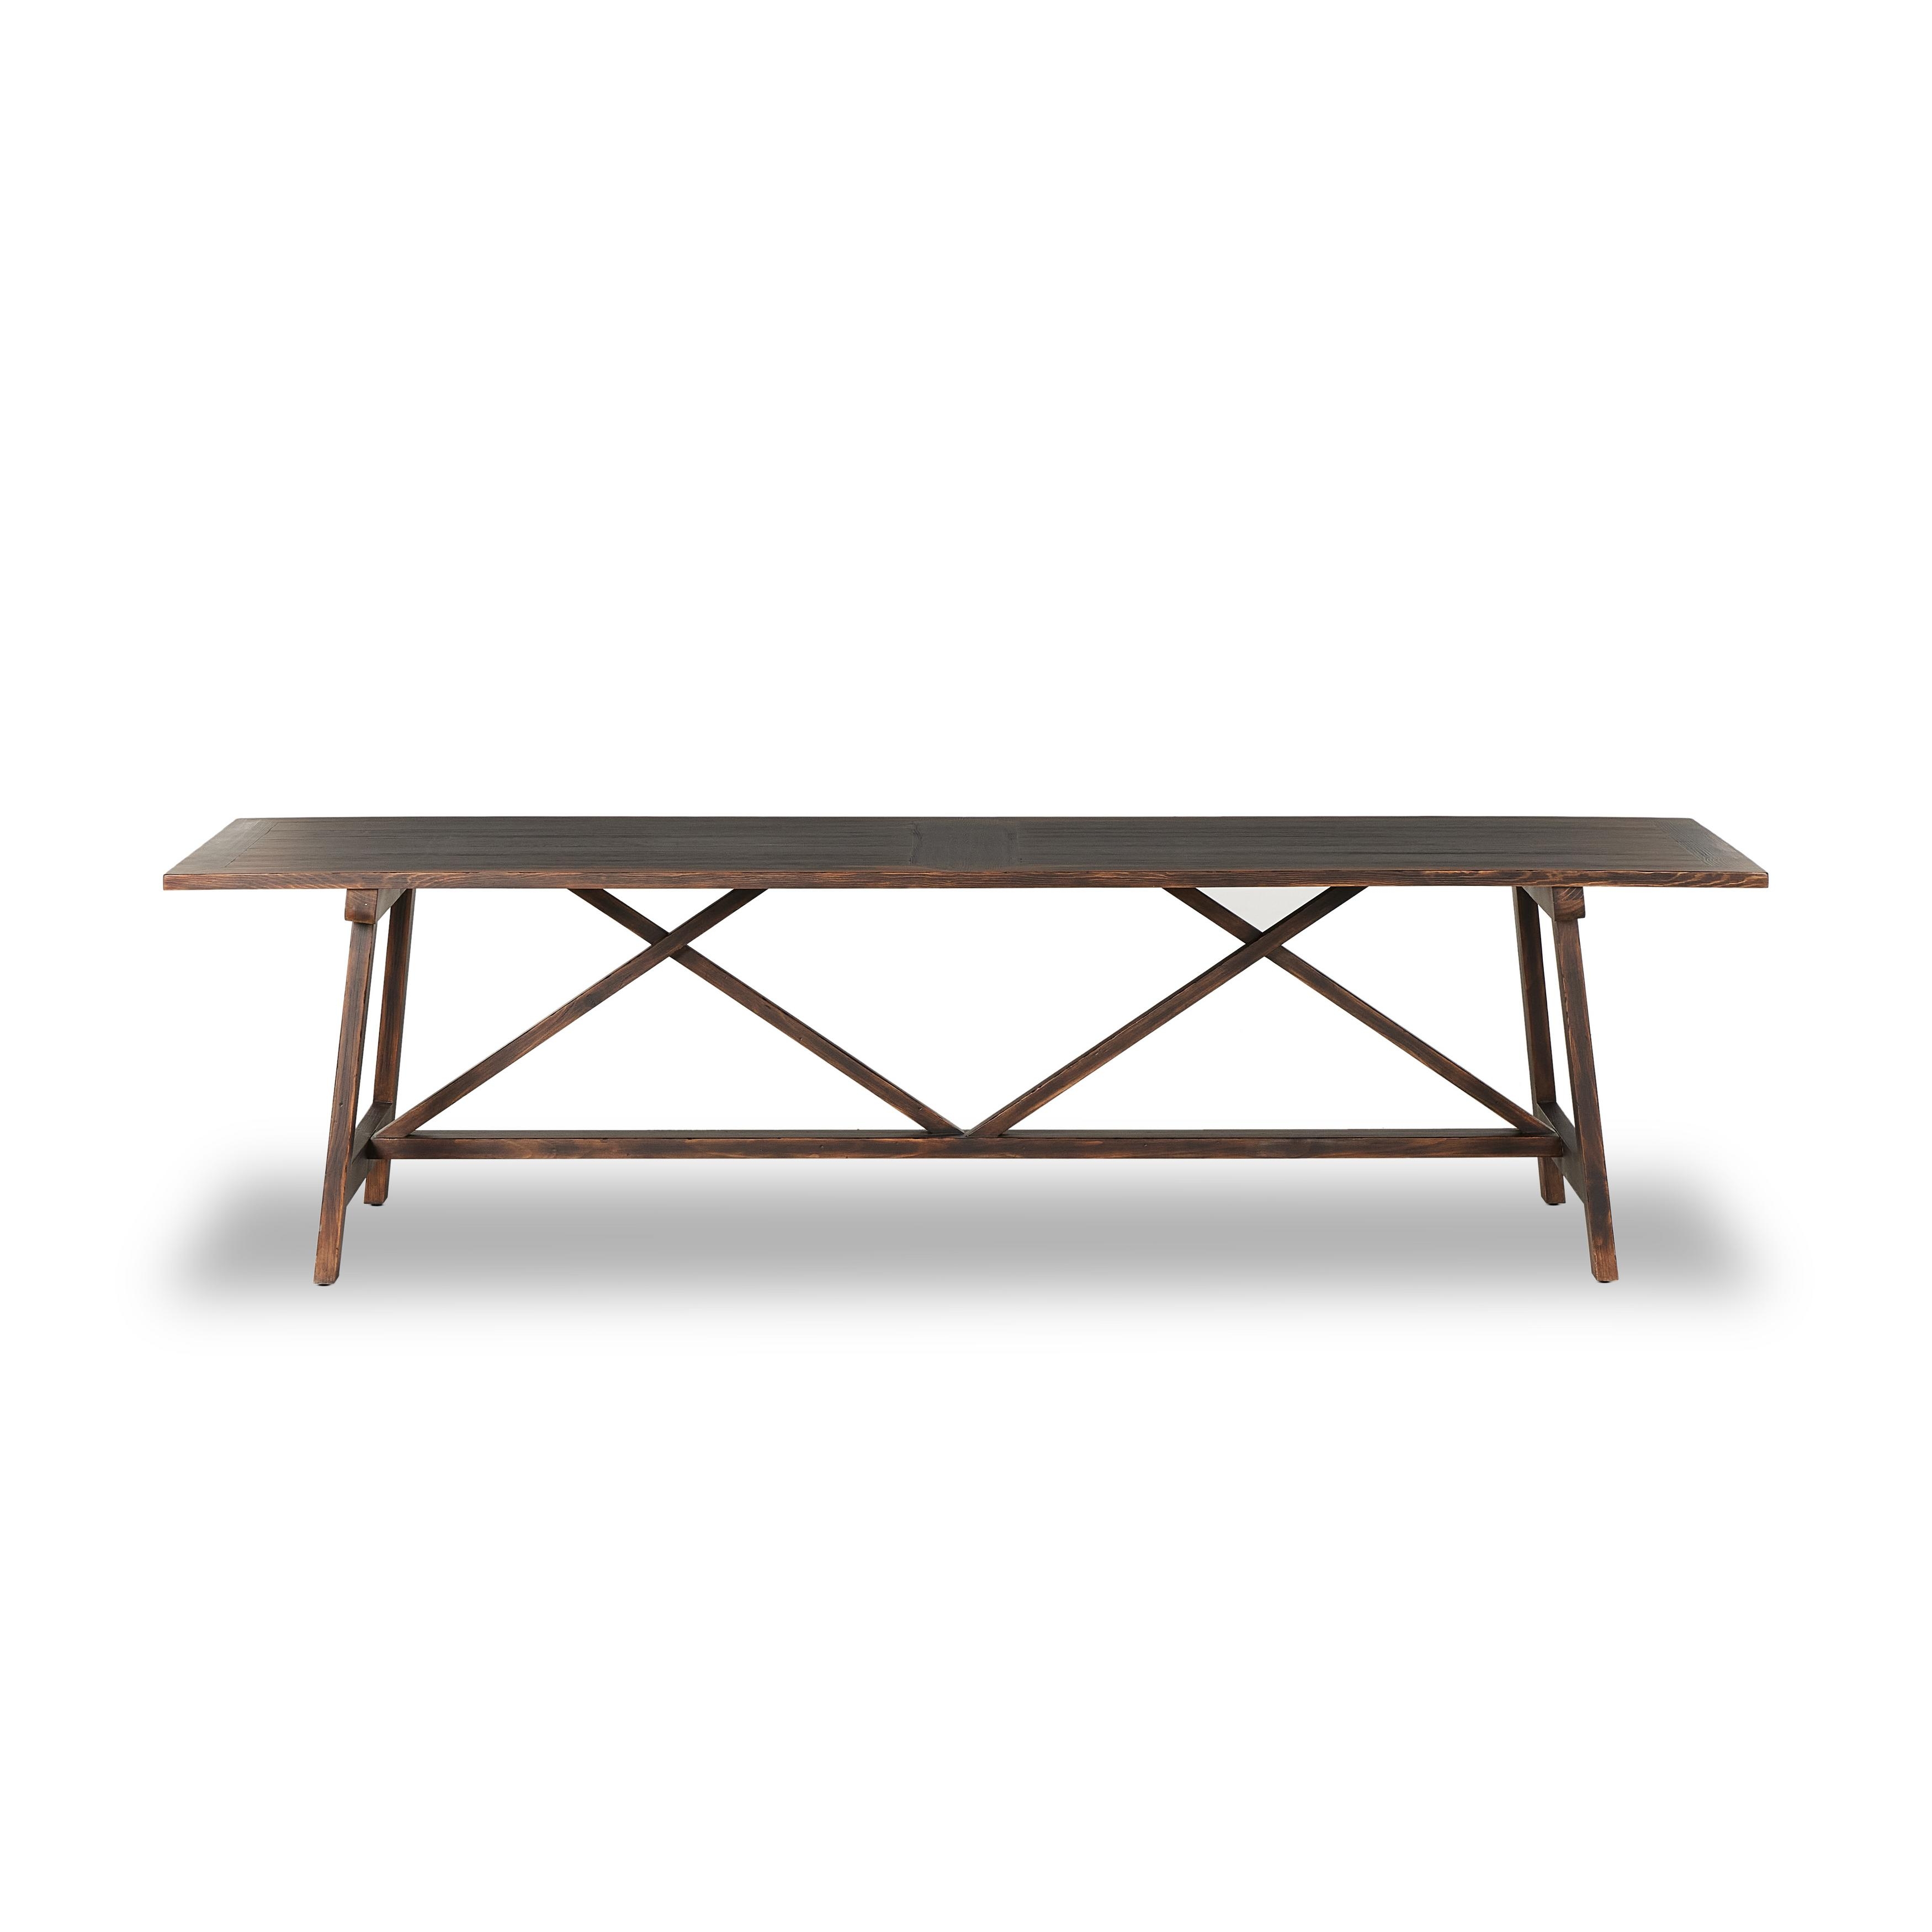 The 1500 Kilometer Dining Table-Agd Brwn - Image 3